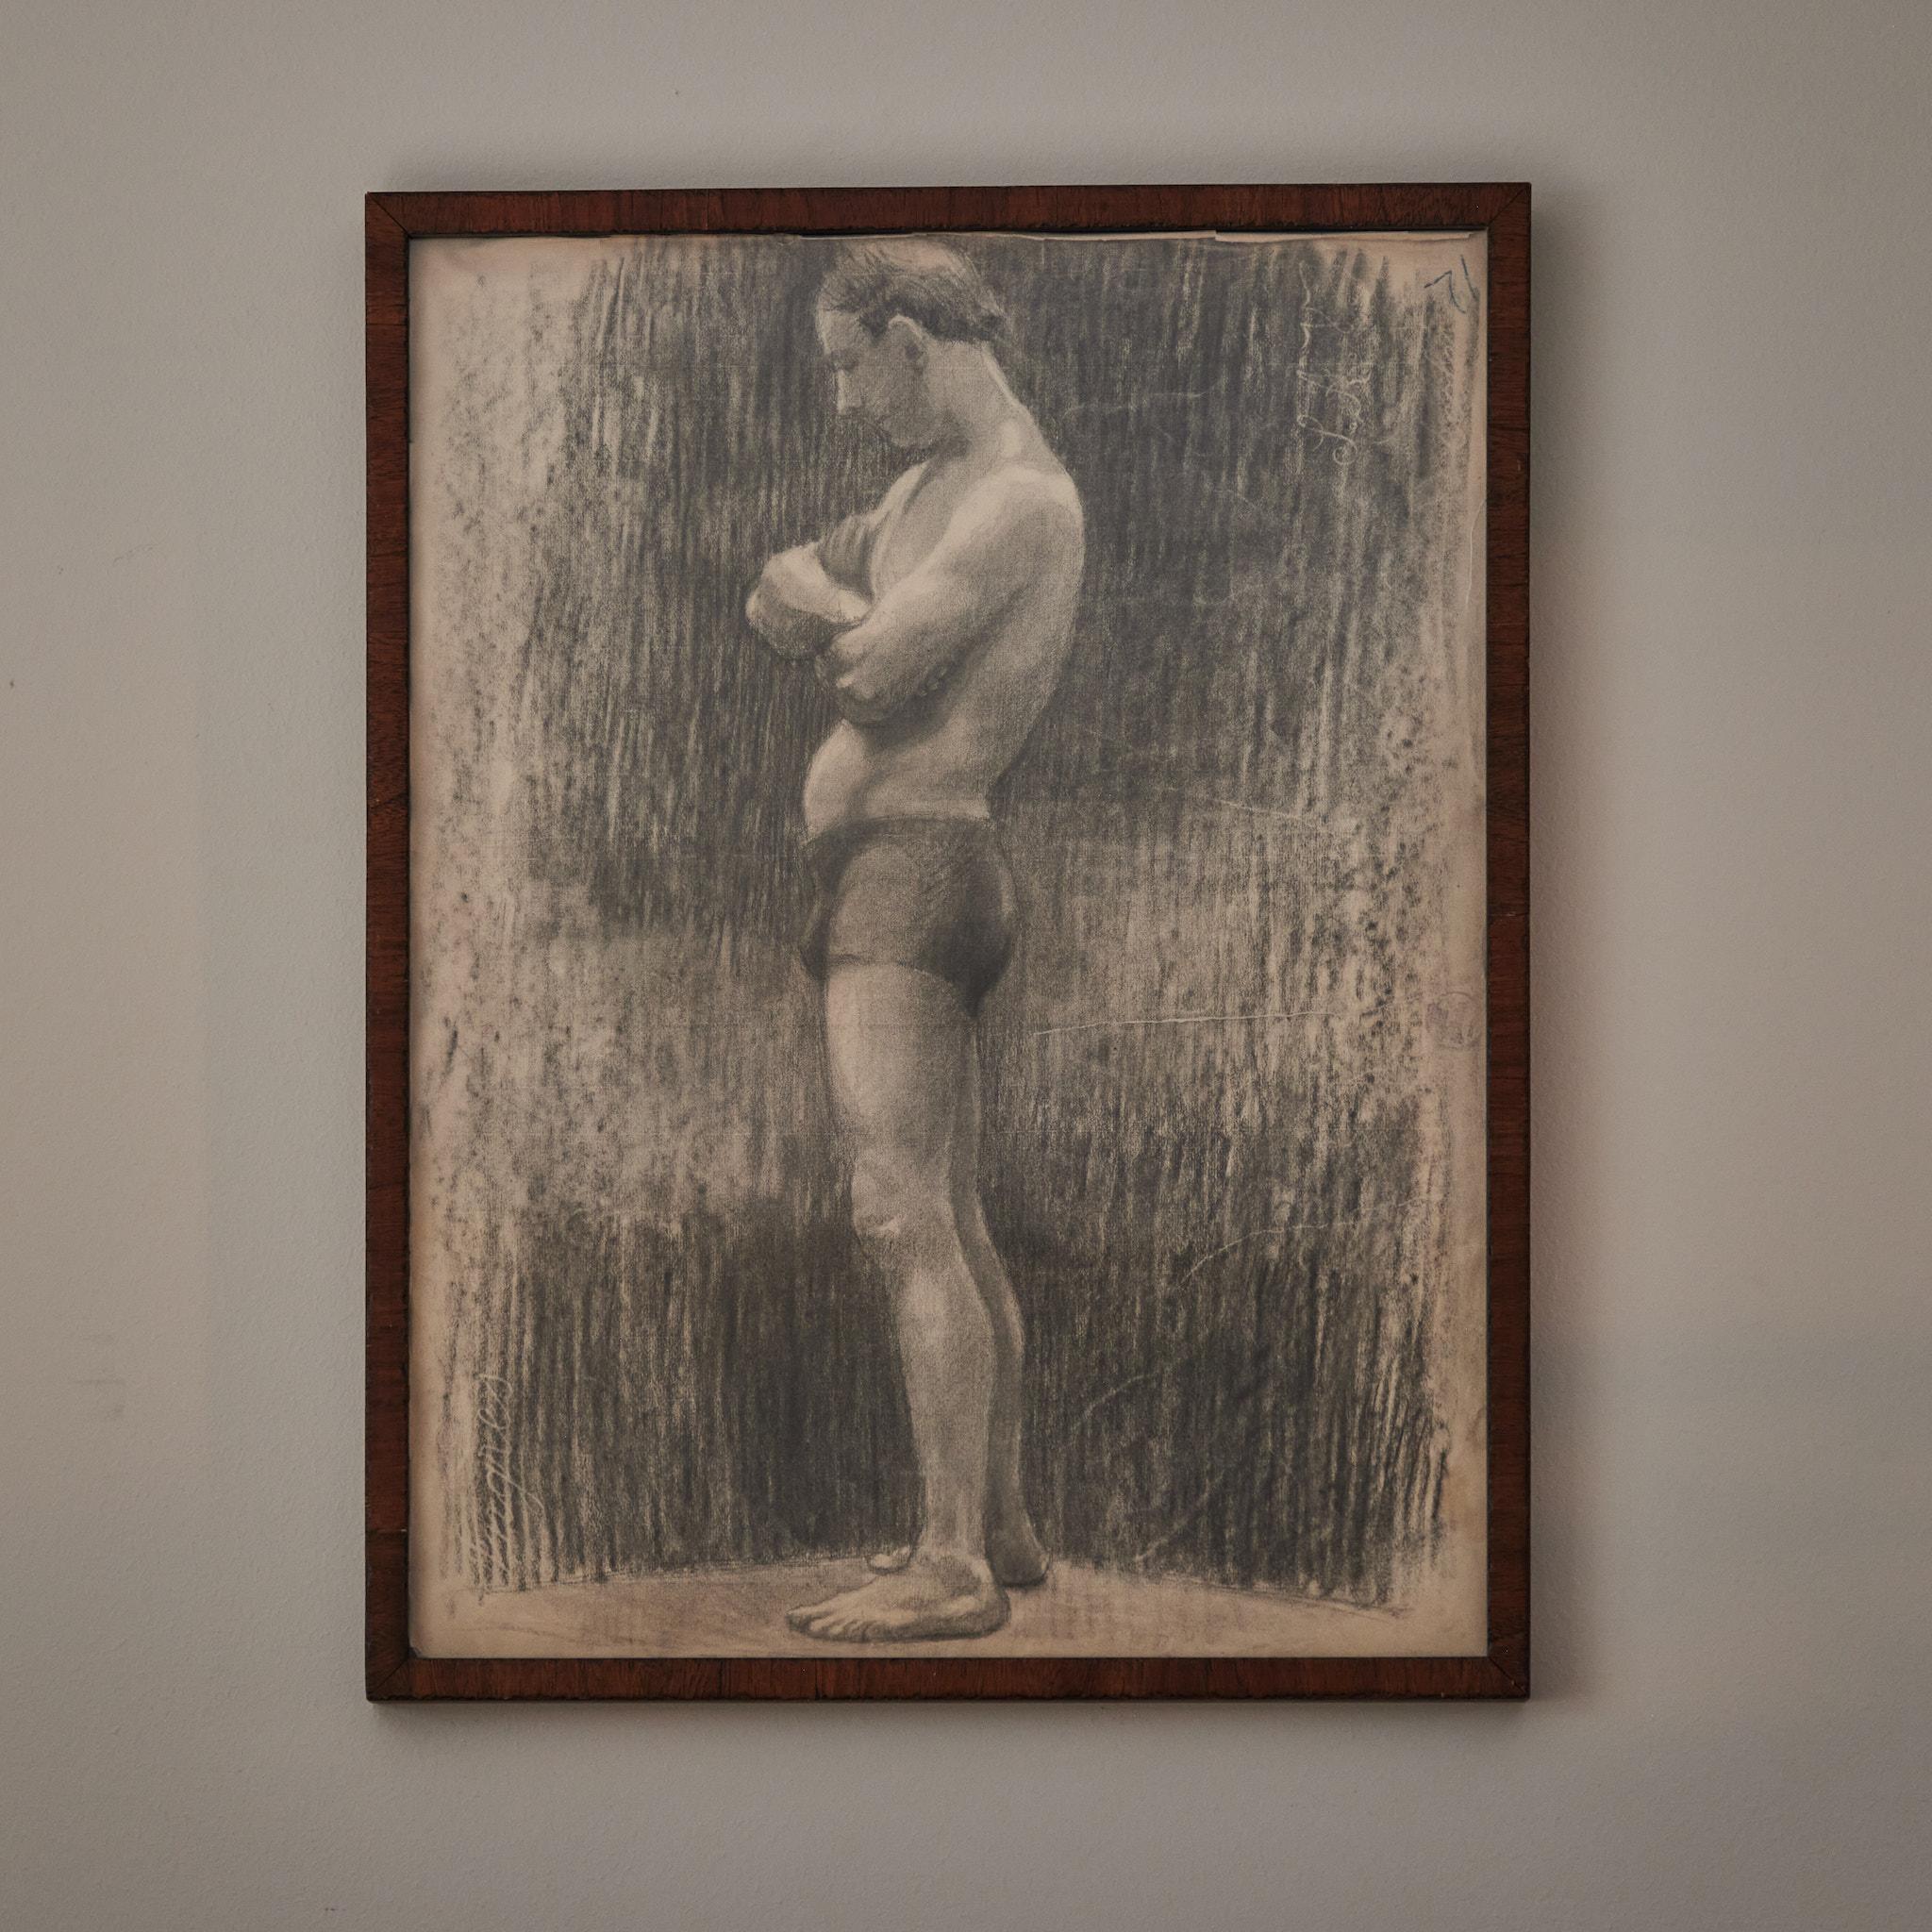 Early 20th-century French Academy-style charcoal drawing of standing male model. Mounted in a custom wood frame, the image has a pensive quality, and a beautiful treatment of light and shadow.
